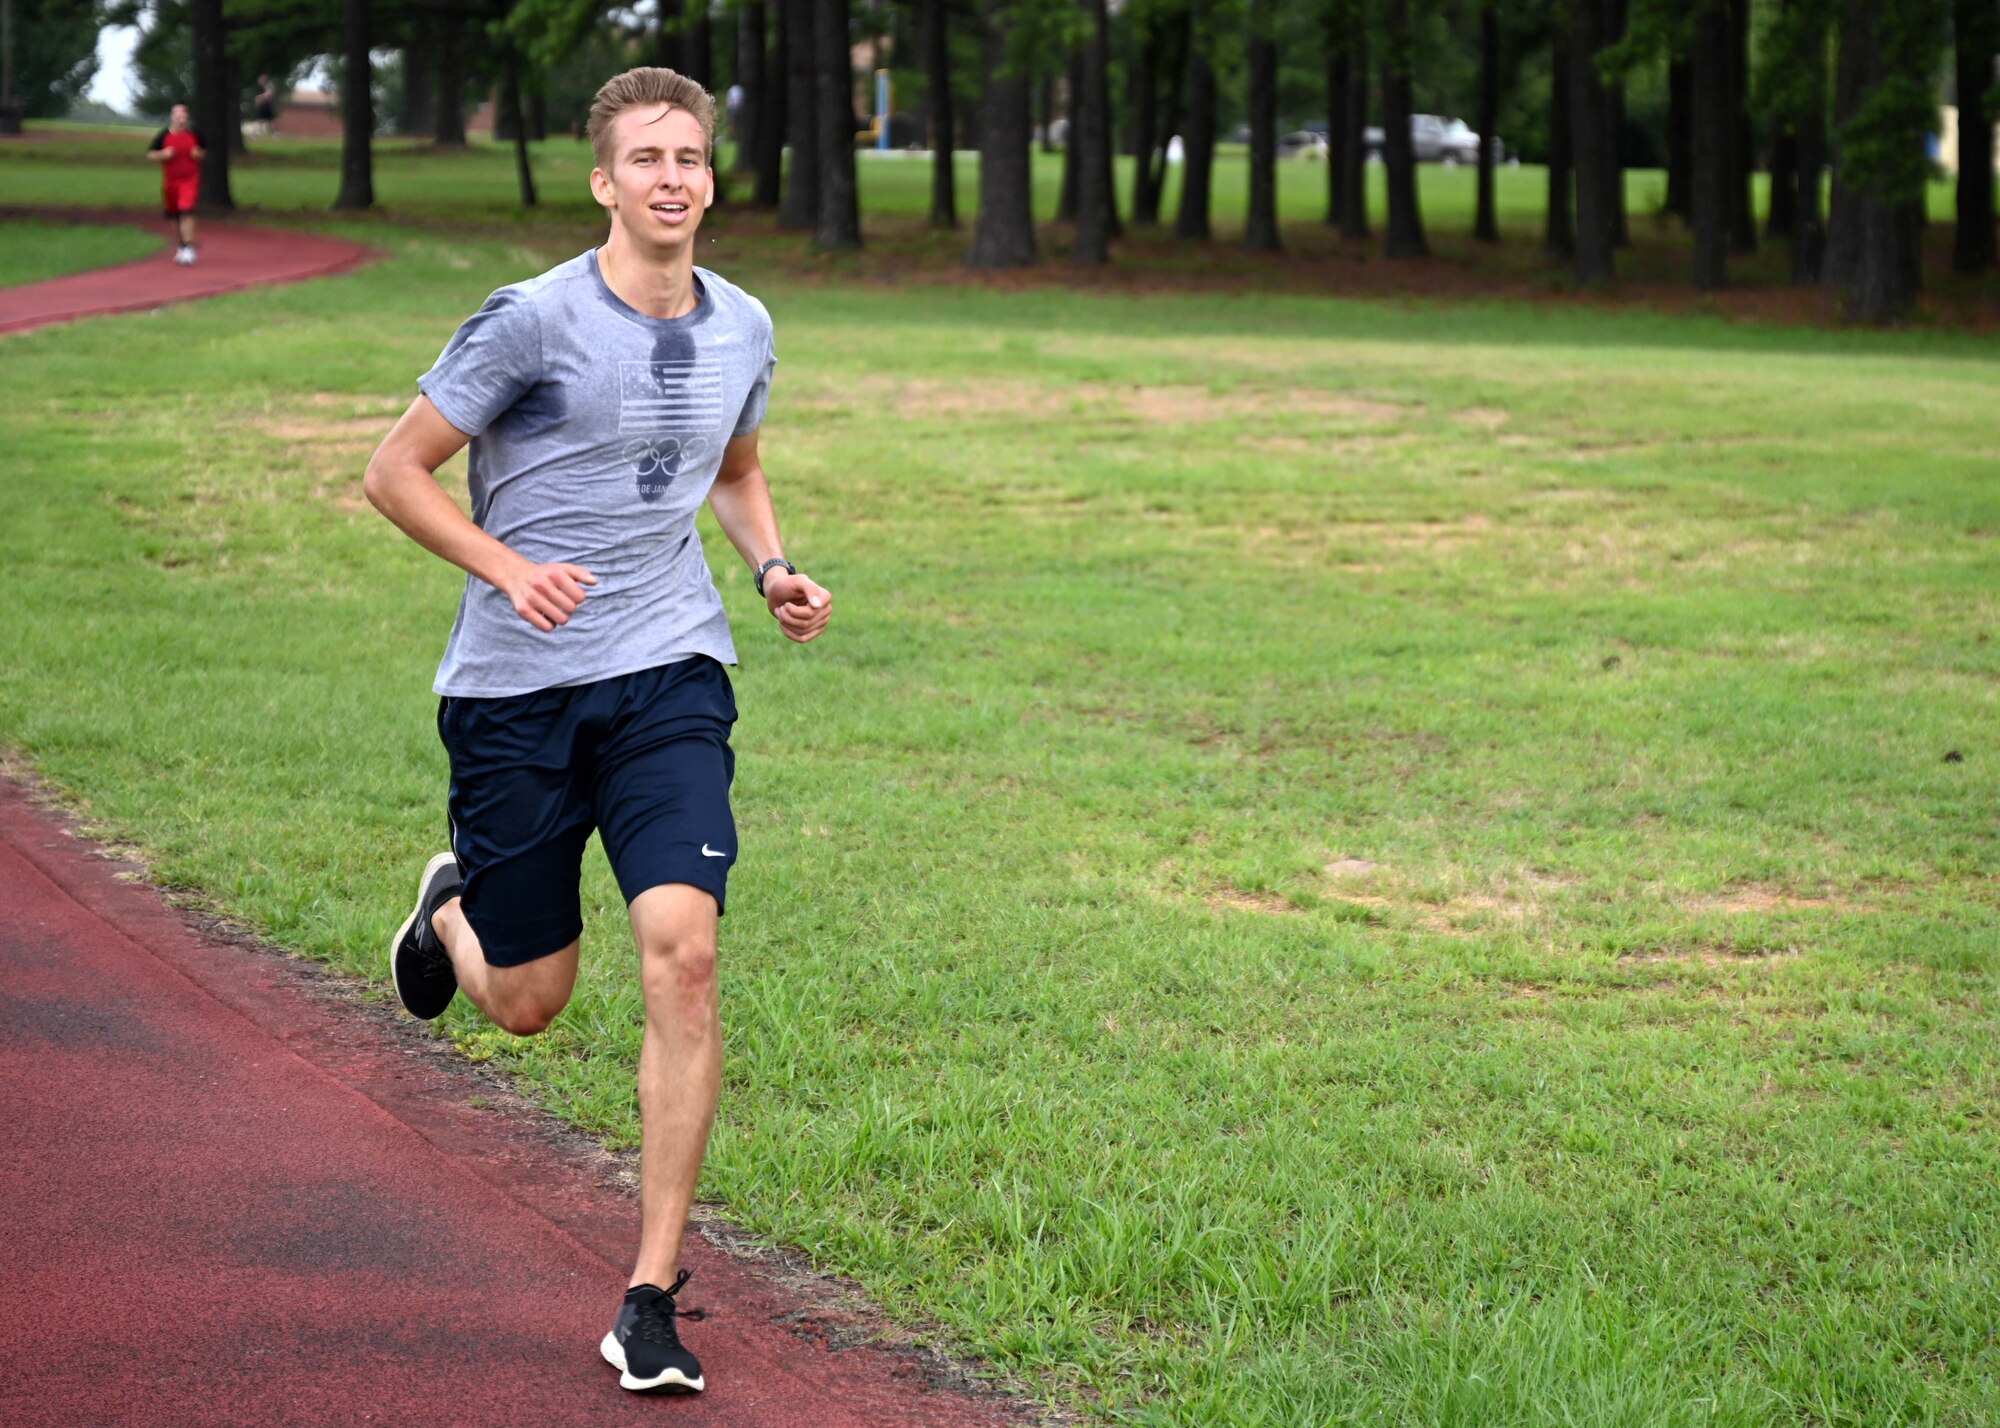 Senior Airman Trenton Sikute, 19th Contracting Squadron contract specialist, runs on the track during a Vital 90 course as part of Wingman Day at Little Rock Air Force Base.